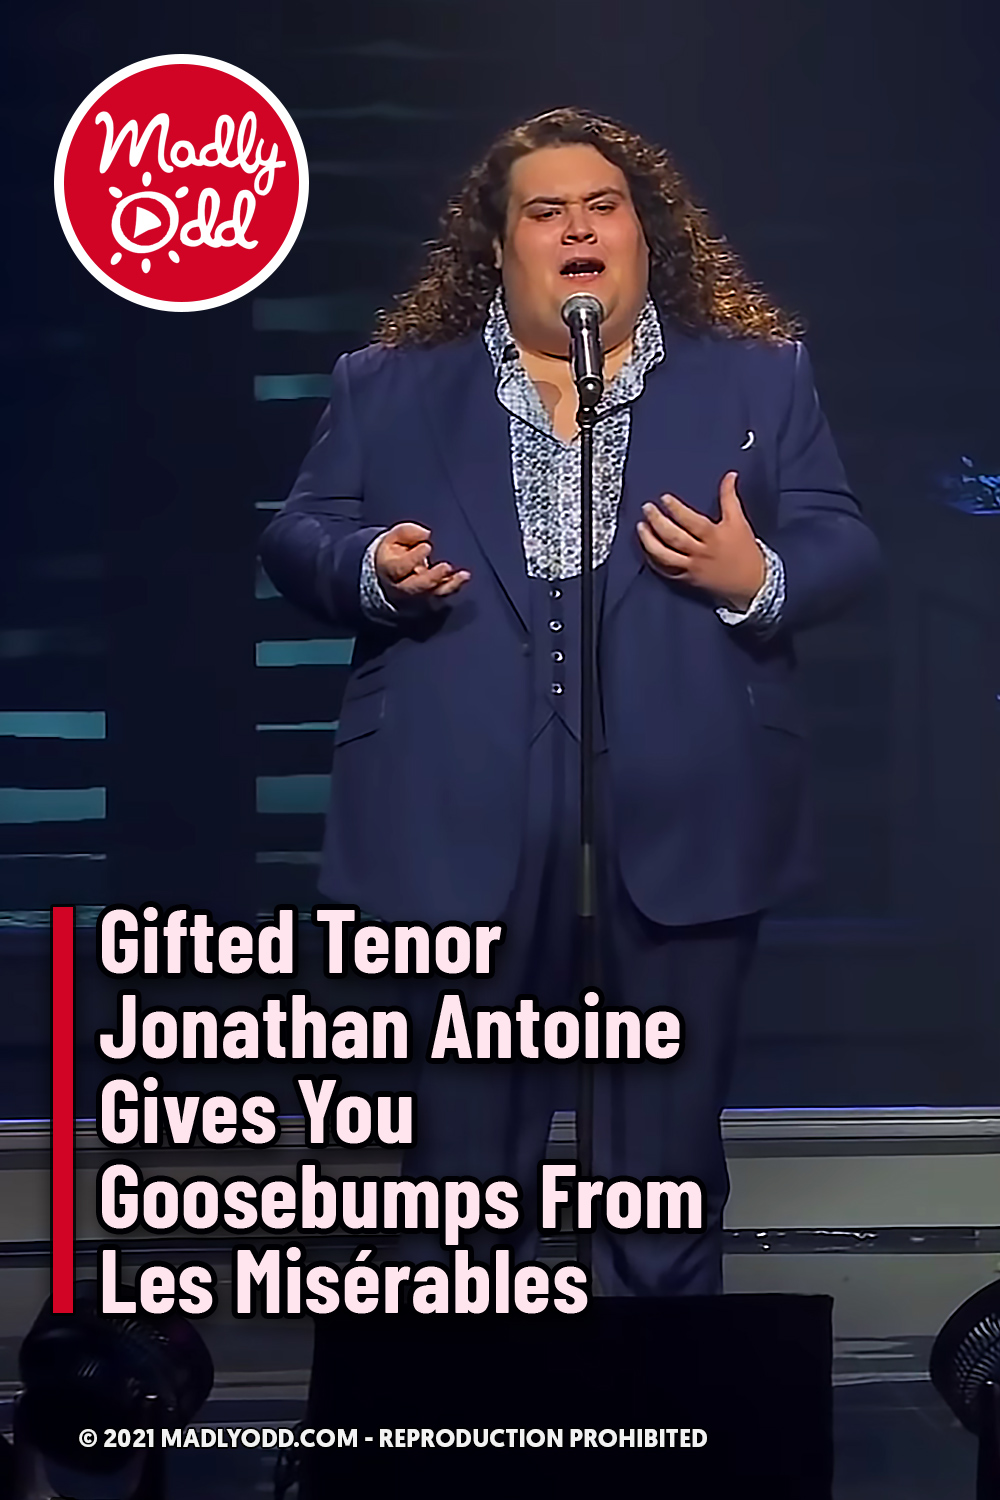 Gifted Tenor Jonathan Antoine Gives You Goosebumps From Les Misérables